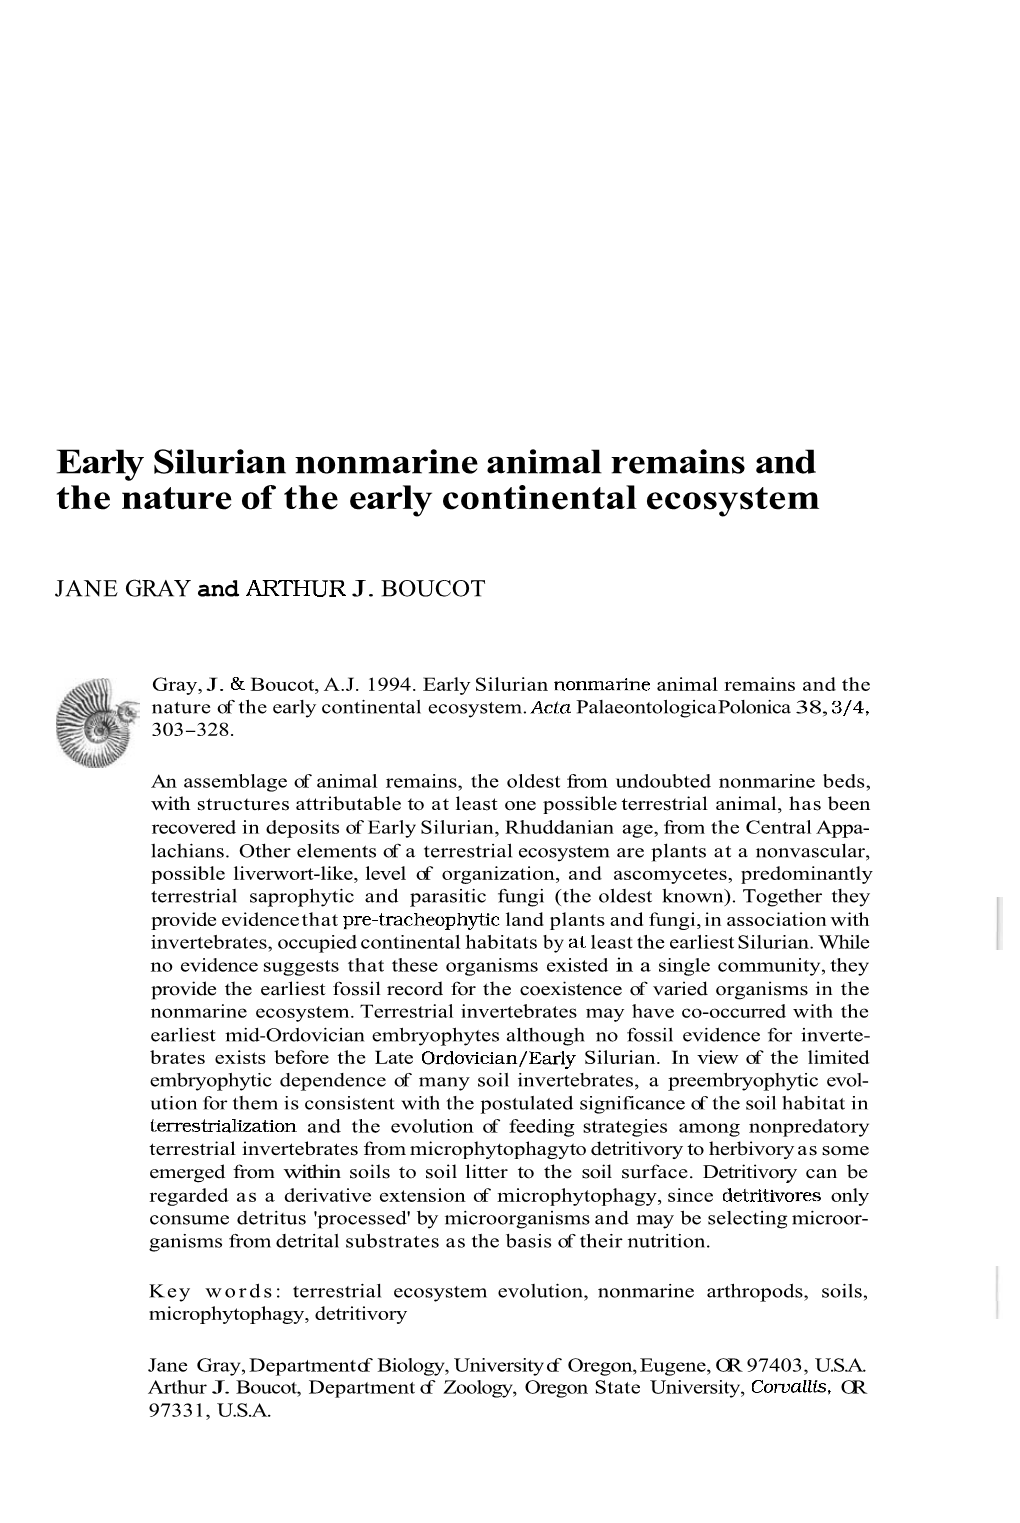 Early Silurian Nonmarine Animal Remains and the Nature of the Early Continental Ecosystem